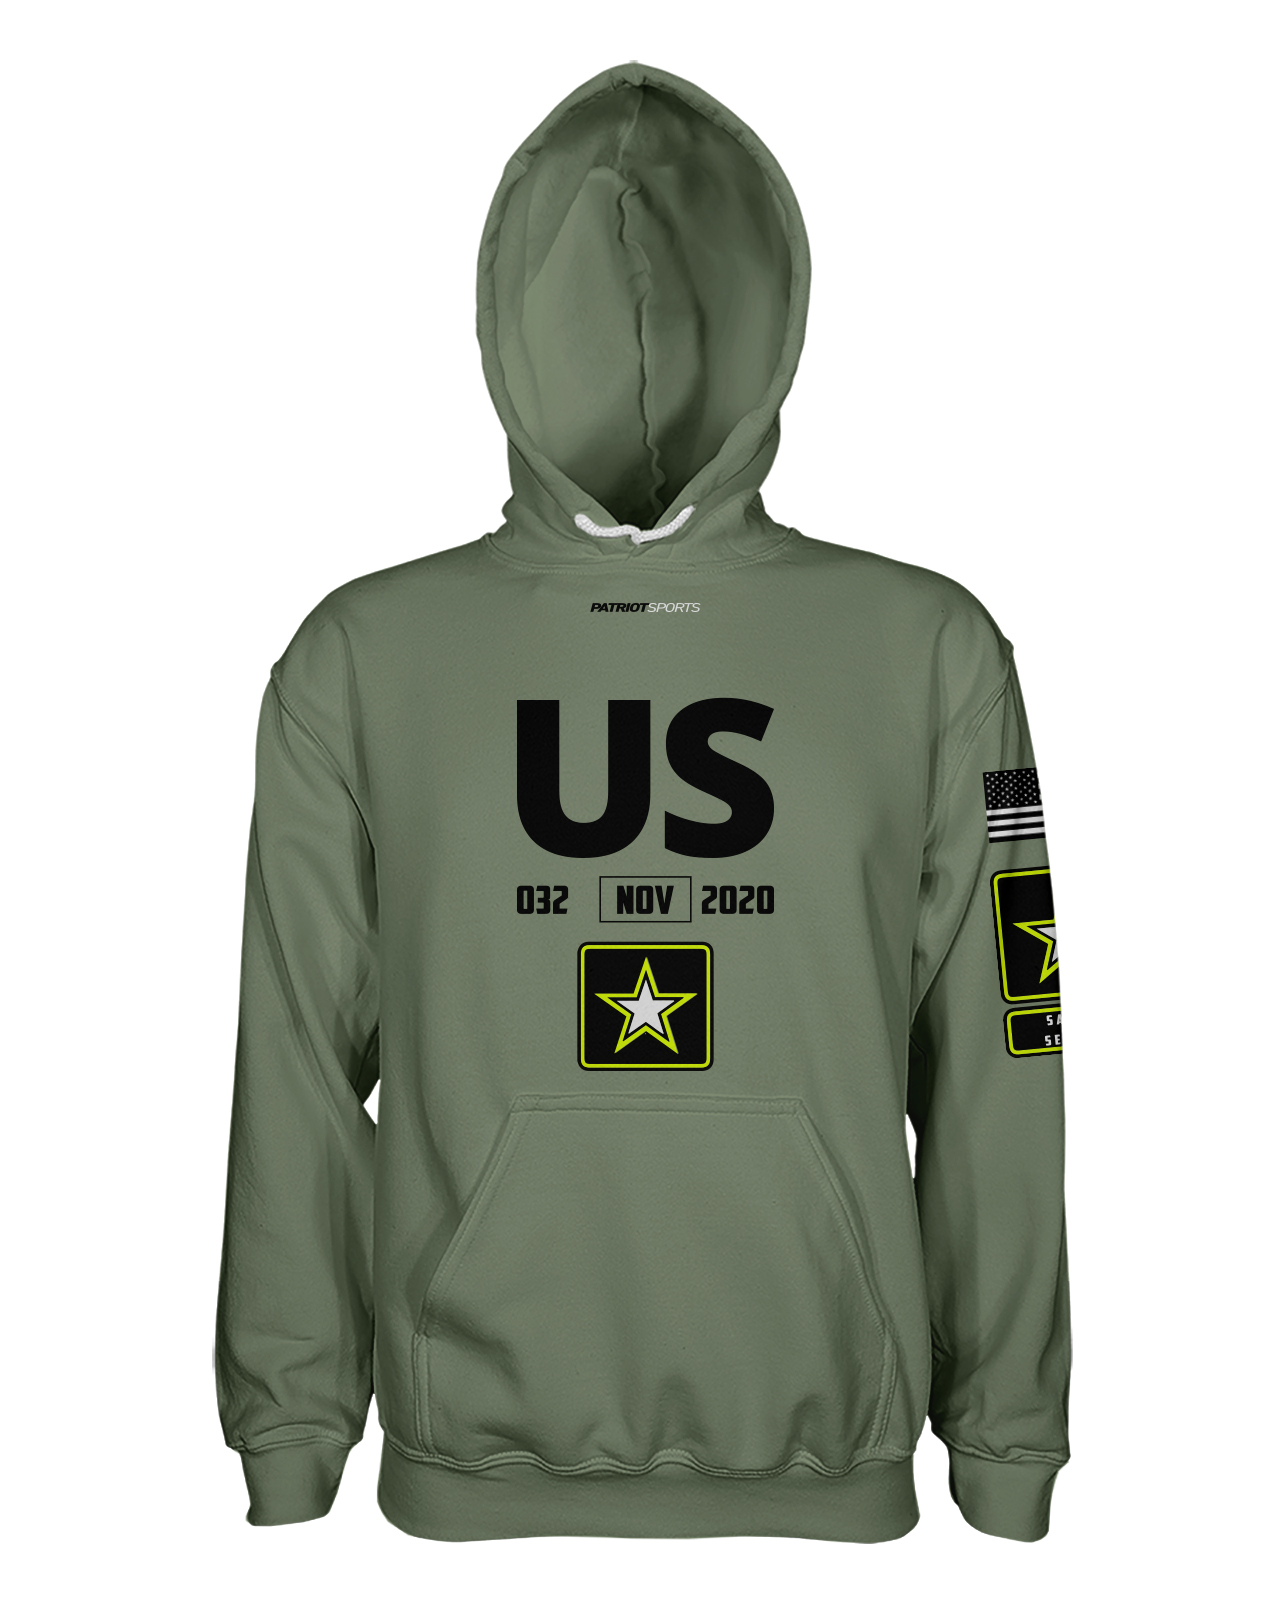 ARMY printed all over in HD on premium fabric. Handmade in California.